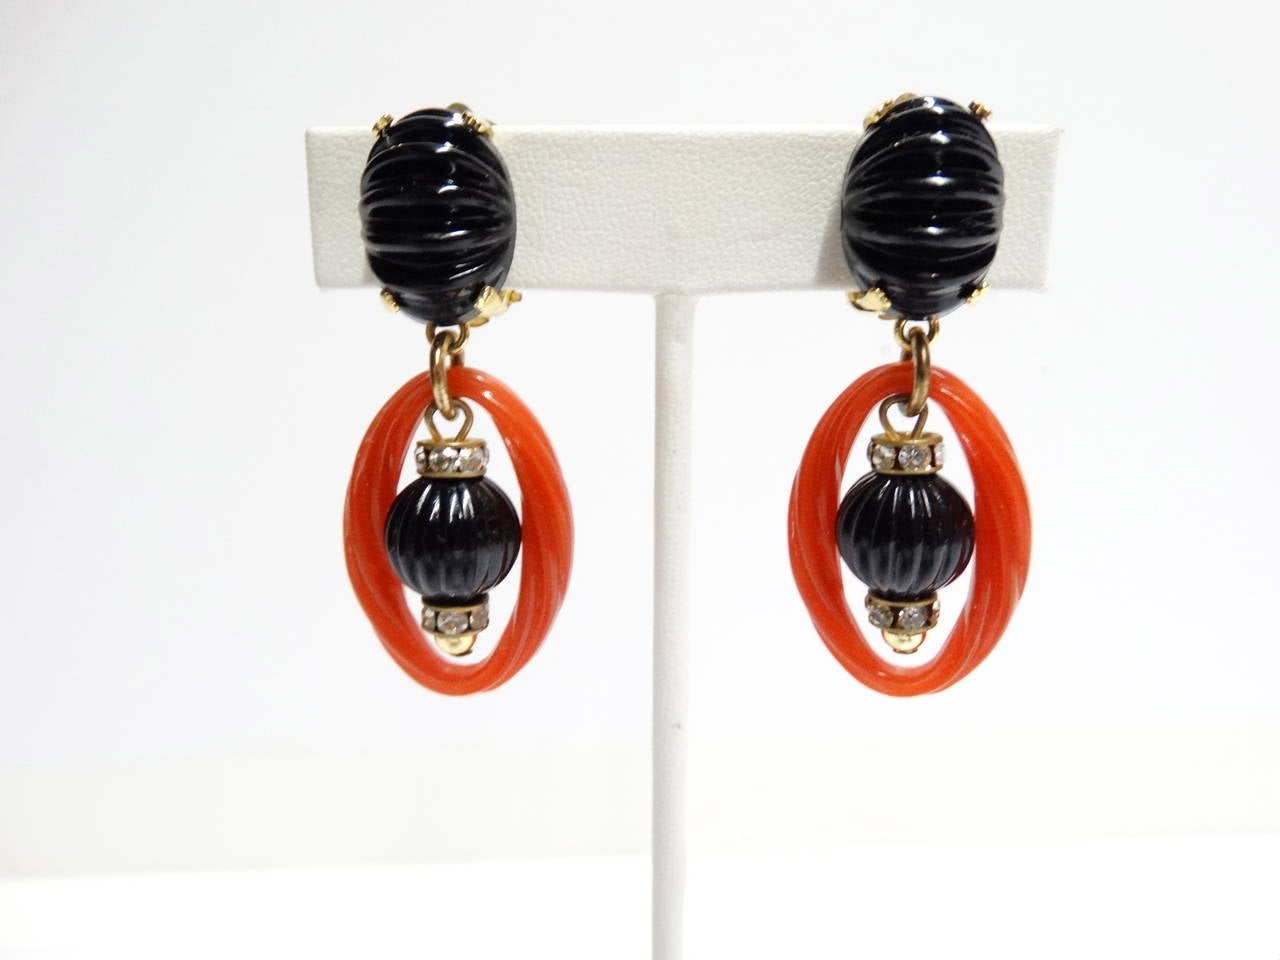 Rare signed 1973 Christian Dior dangle earrings! They feature burt red and jet black resin with a jet black stone in the center of the drop resin hoop. Made in Germany  	

Measurments: 
Lenght:  2 in. 
WIDTH: 2.5 in.